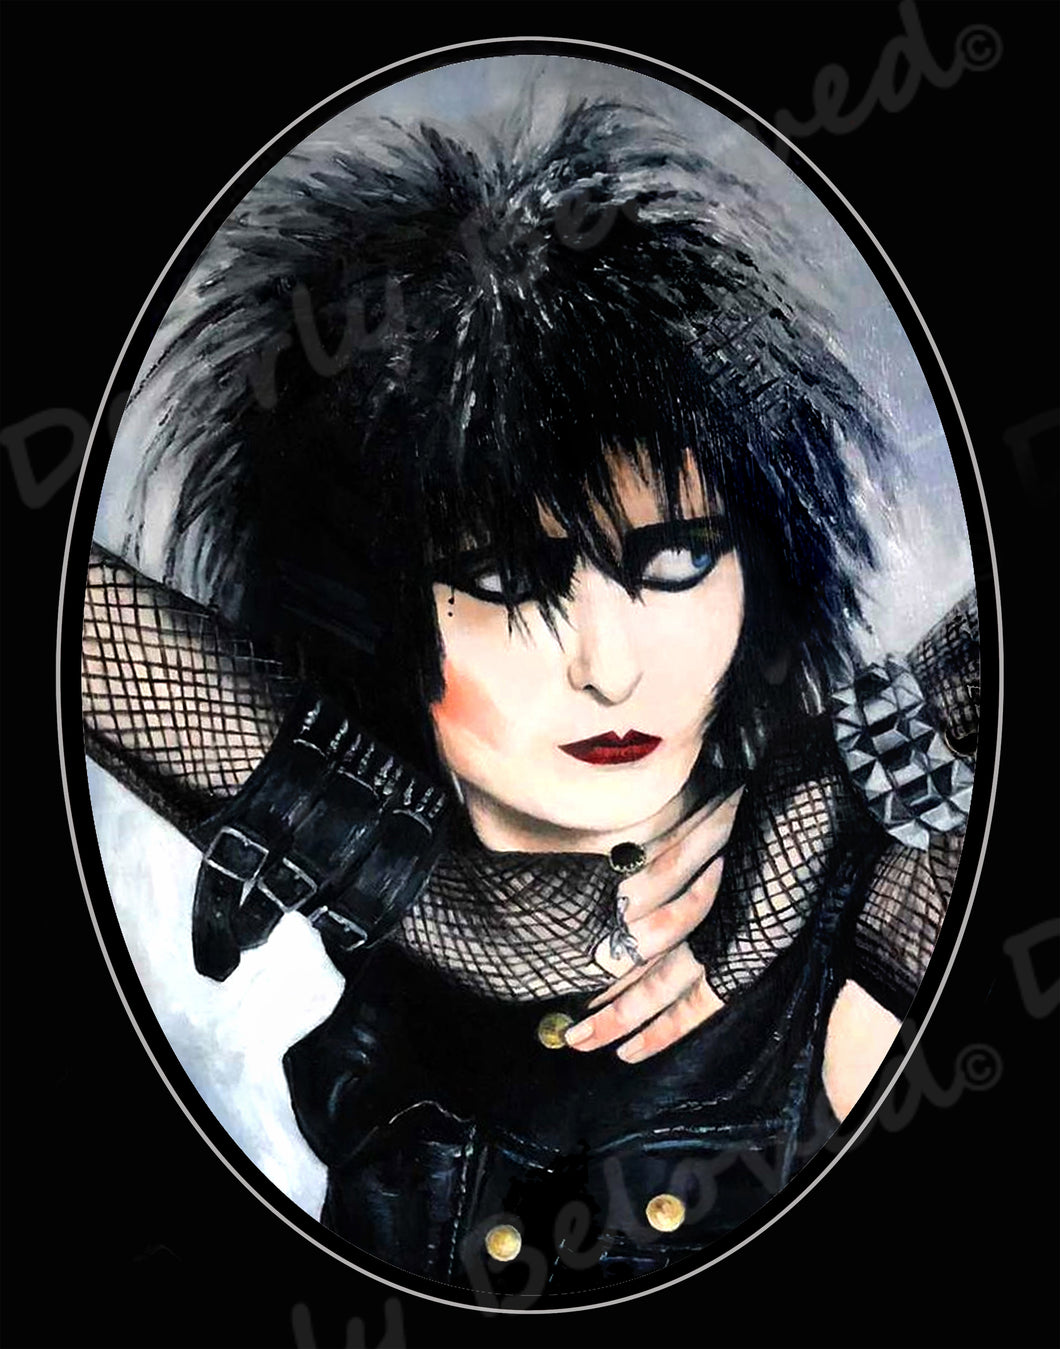 Siouxsie Sioux Art - Painting PRINT